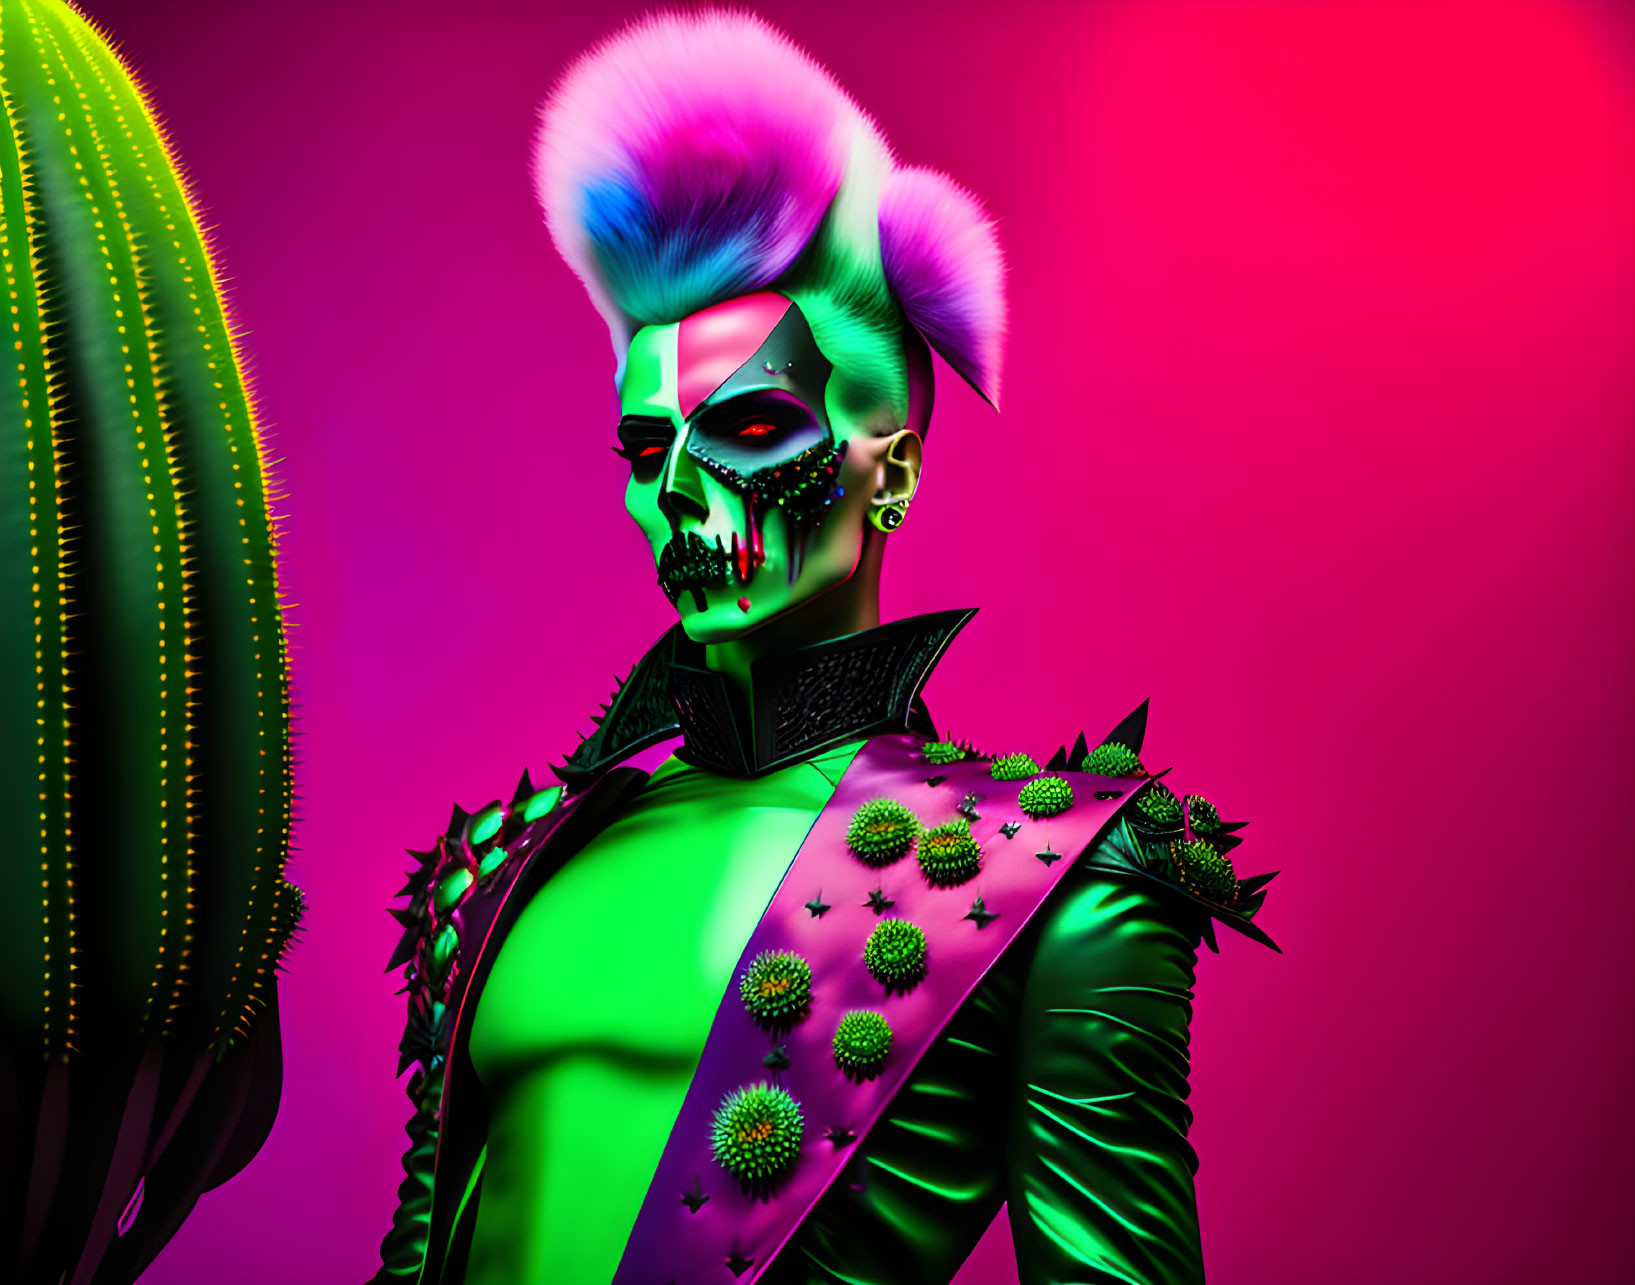 Person with punk aesthetic: Green skin, mohawk, skull makeup on pink background